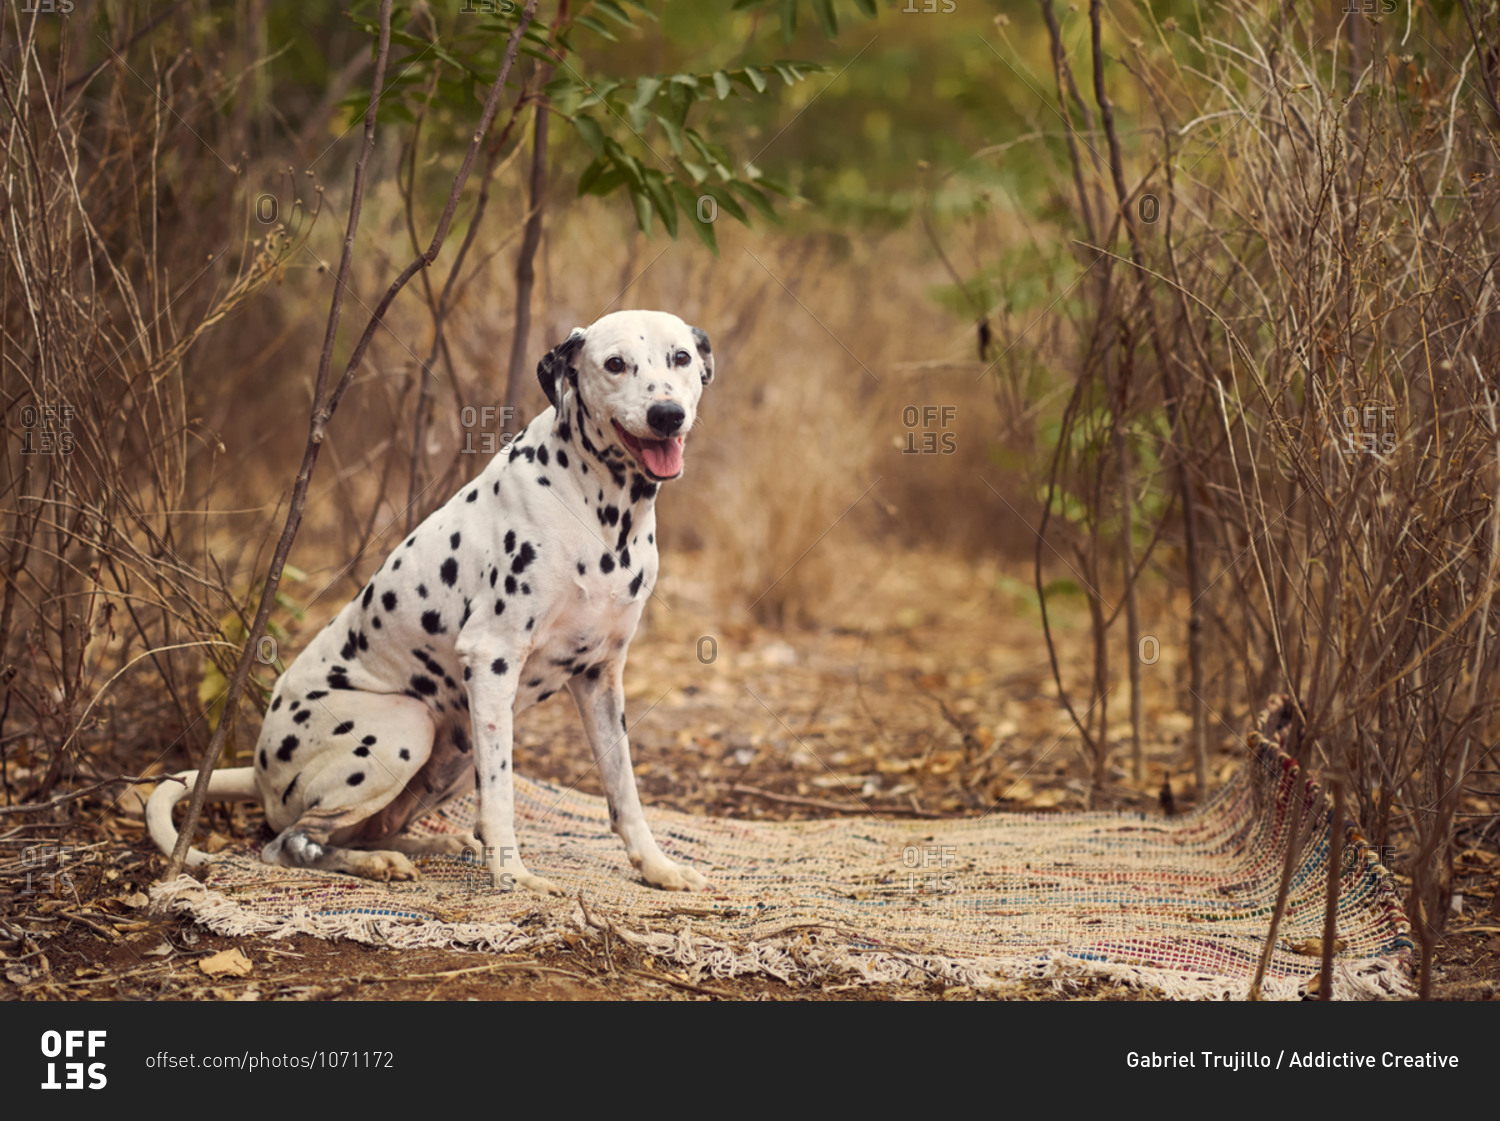 Funny purebred Dalmatian dog sitting on rug near dry grass in nature at daytime